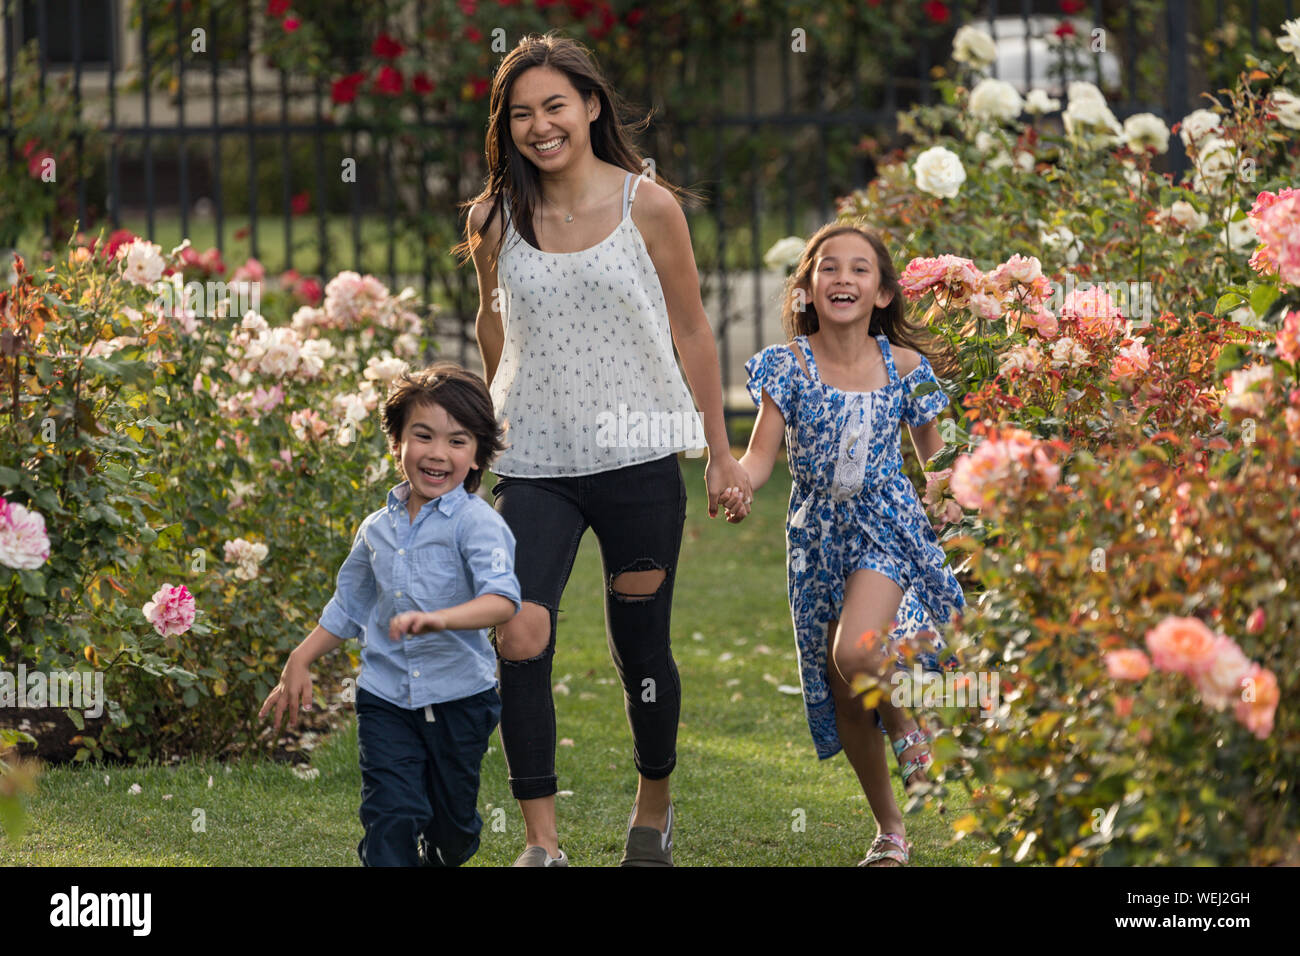 Sisters and brother of Asian and mixed ethnicity running and laughing together in rose garden, San Jose, California Stock Photo